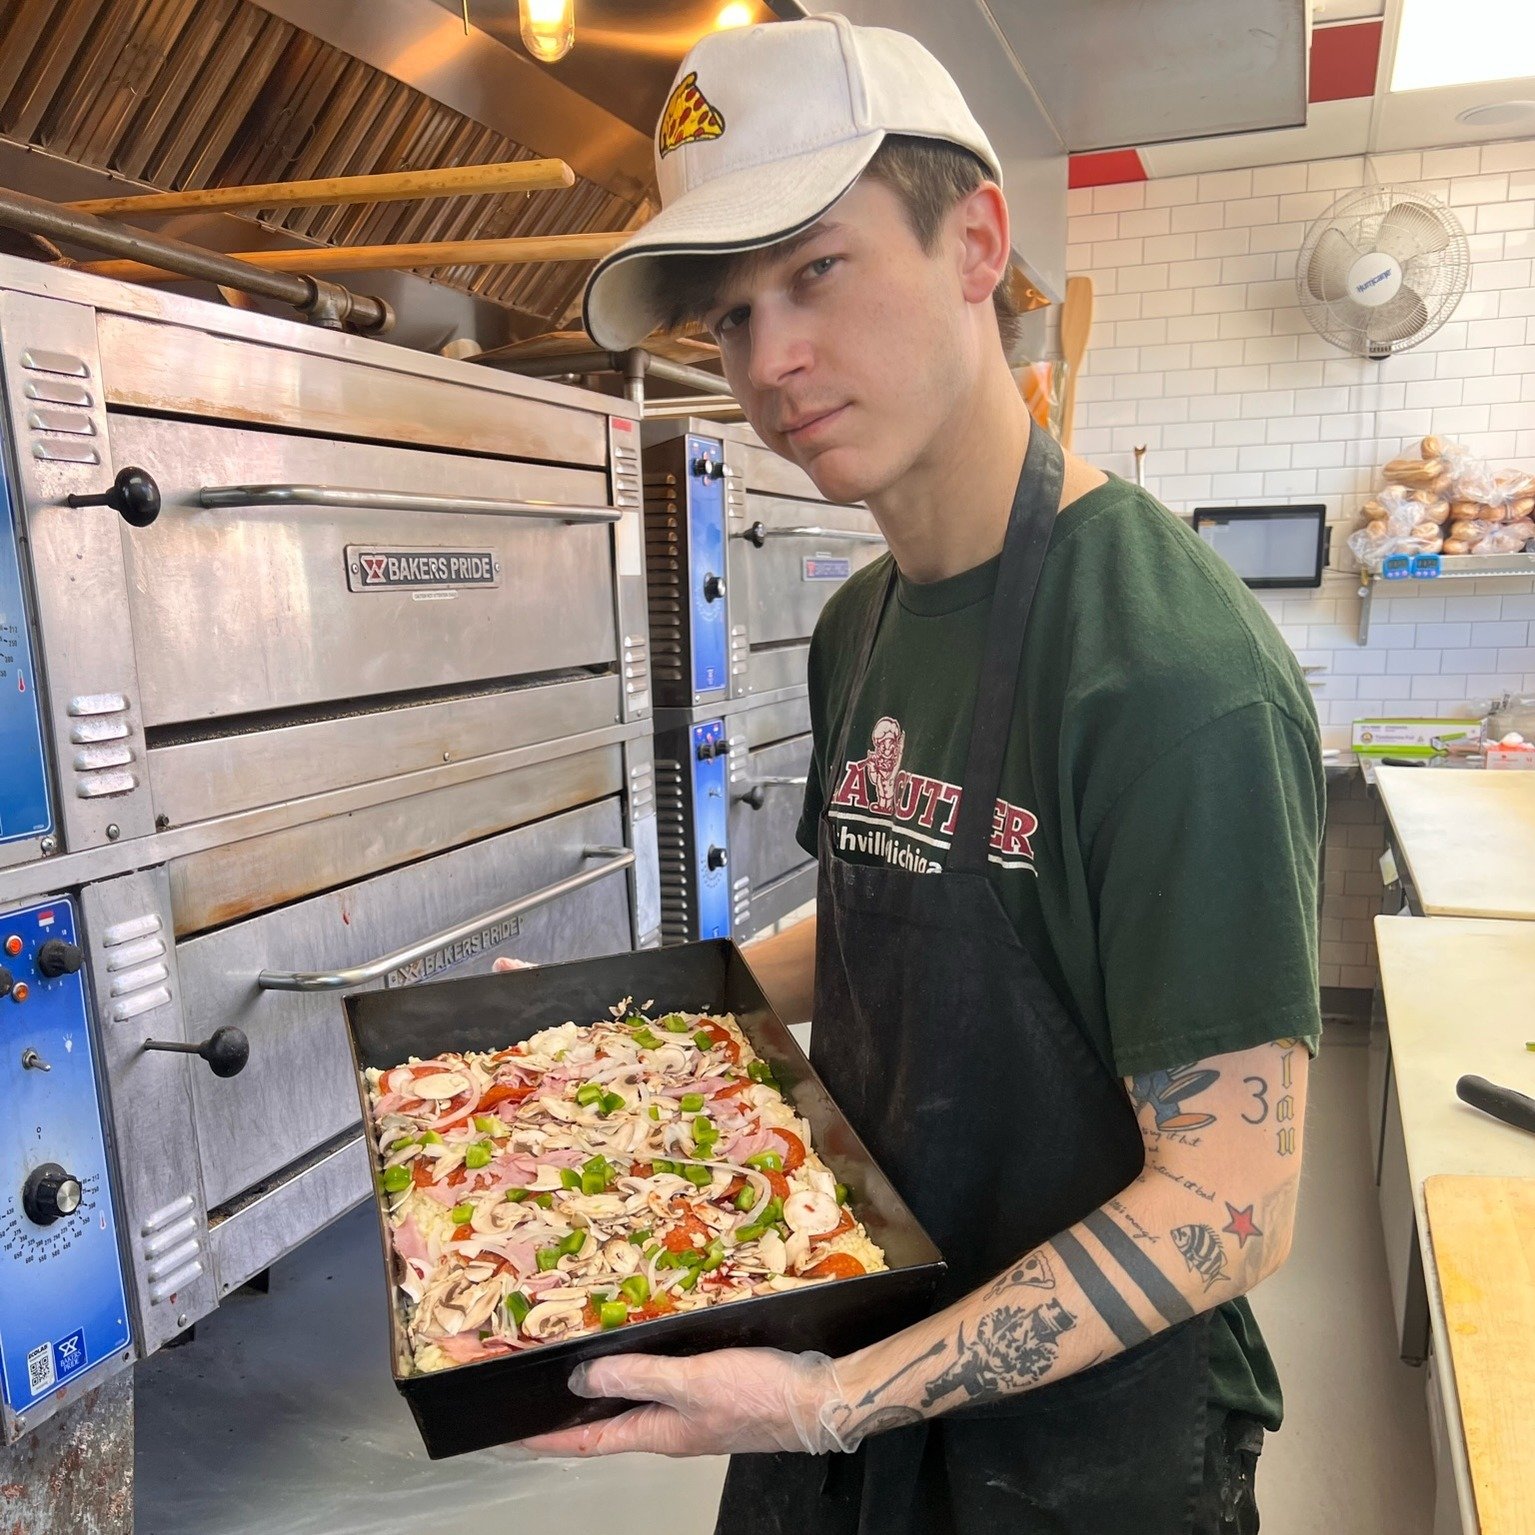 If there's two things Austin knows how to do, it's:
1. look cool all the time 
2. make a mean square pizza 

#detroitstylepizza  #northvillemichigan #pizza #northvillemi #supportsmallbusiness #eatlocal #supportlocalbusiness #supportlocal #squarepizza